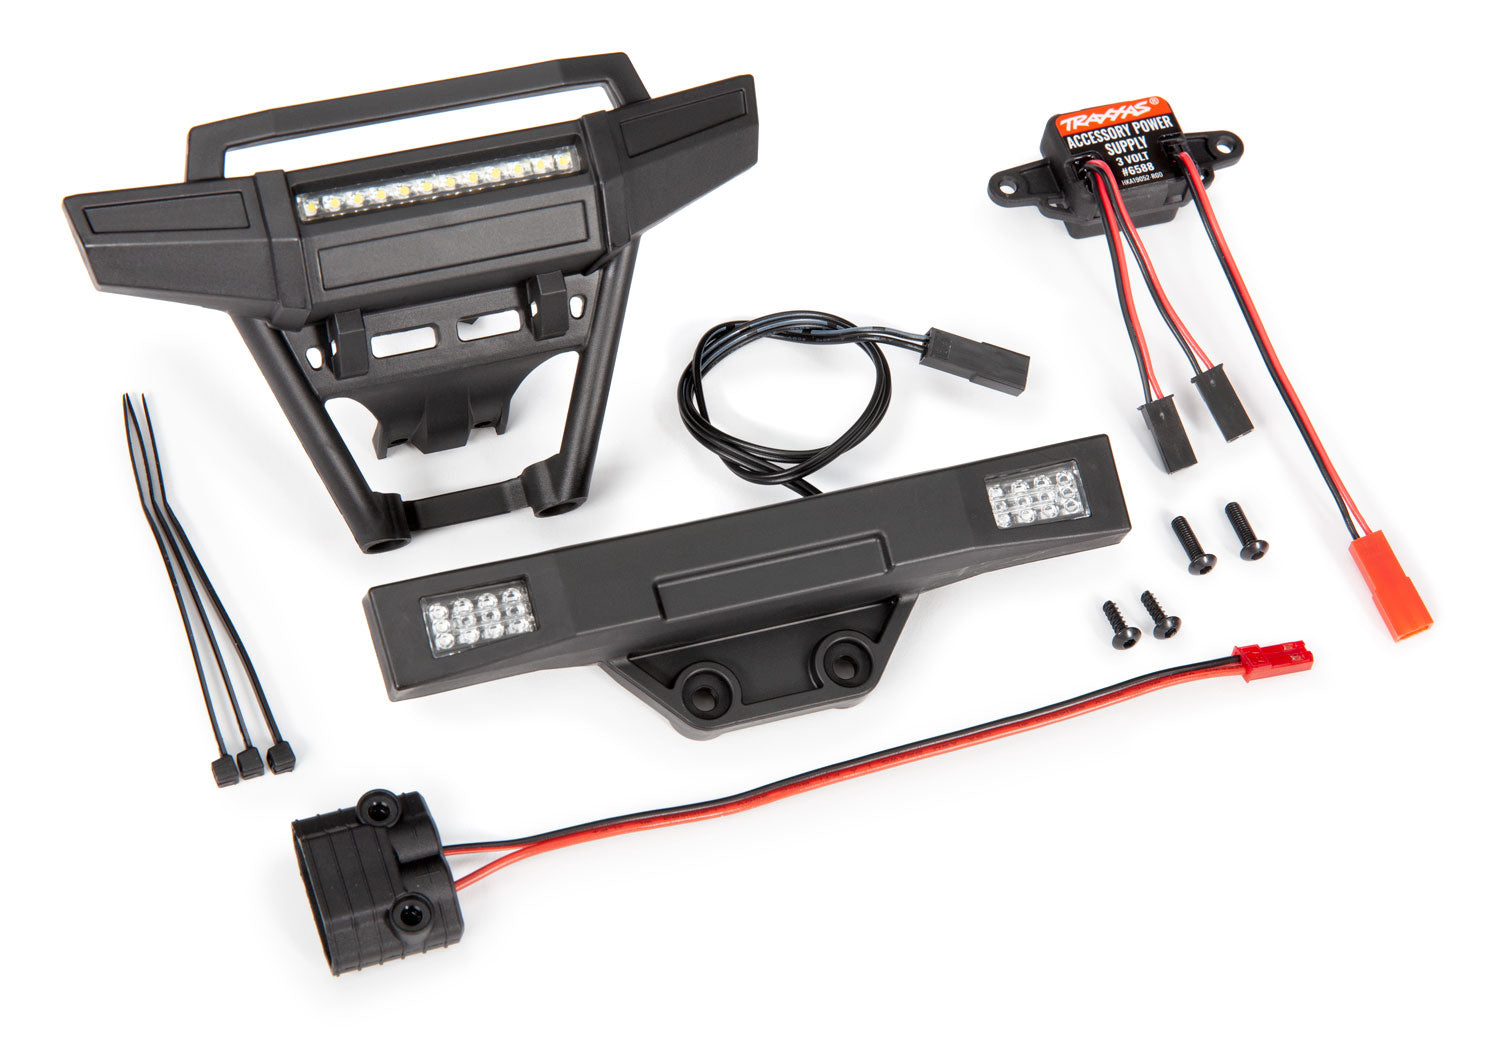 TRAXXAS 9095 Hoss LED light set, complete (includes front and rear bumpers with LED lights, 3-volt accessory power supply, and power tap connector (with cable) (fits #9011 body)